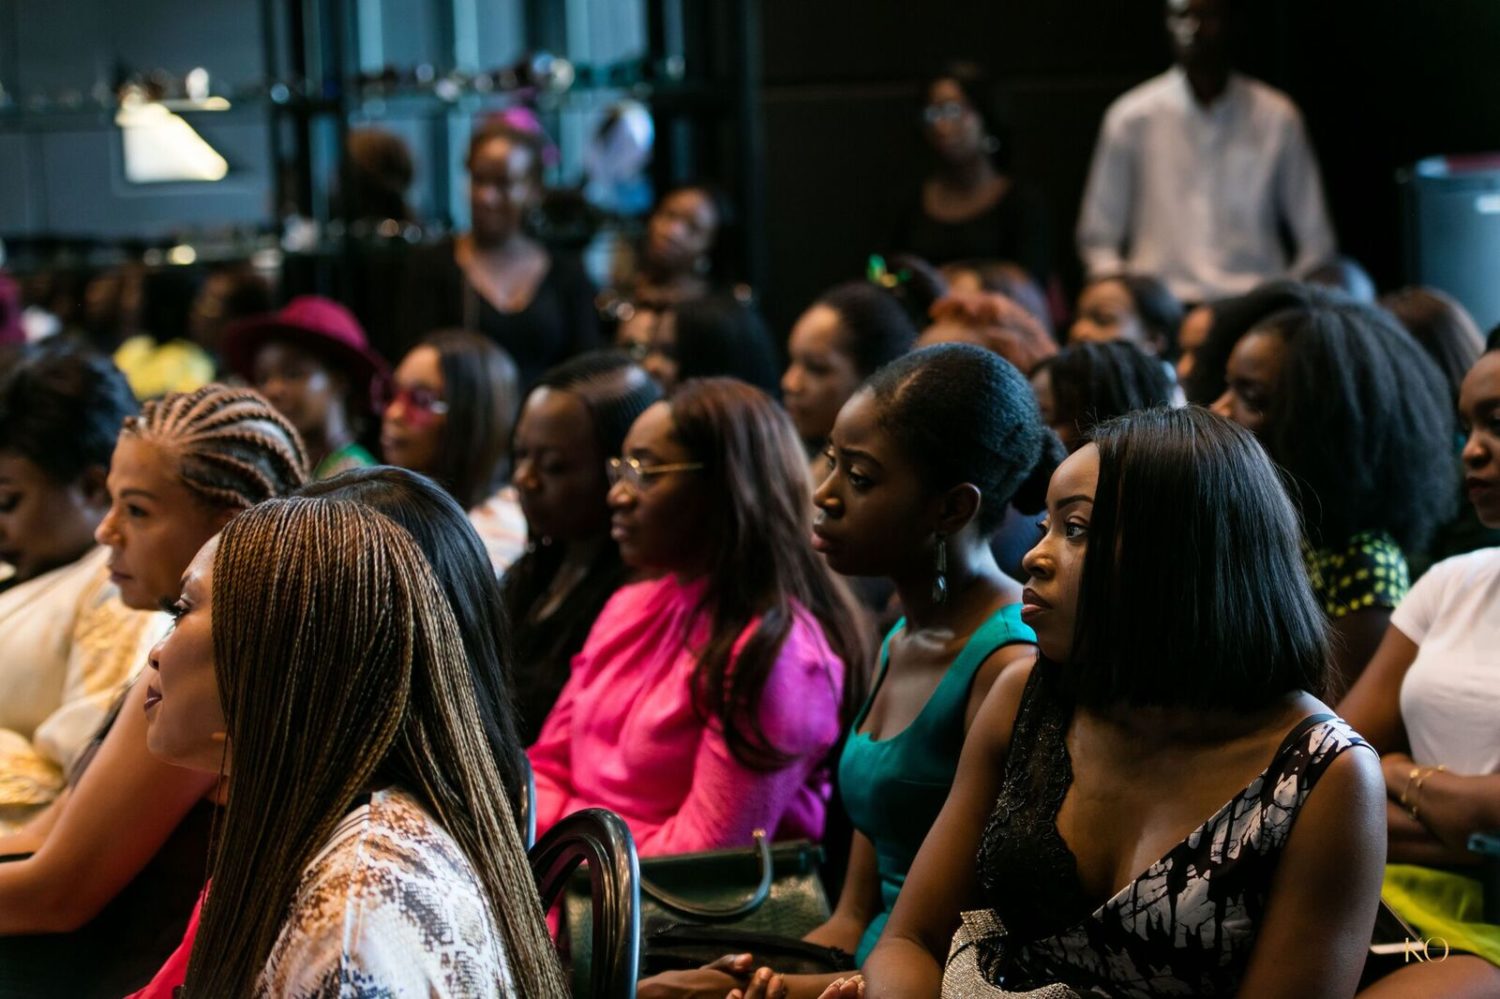 CLAN Hosted A Powerful Event For Women In ALÁRA  Over Cocktails & Canapés – Here’s All That Happened